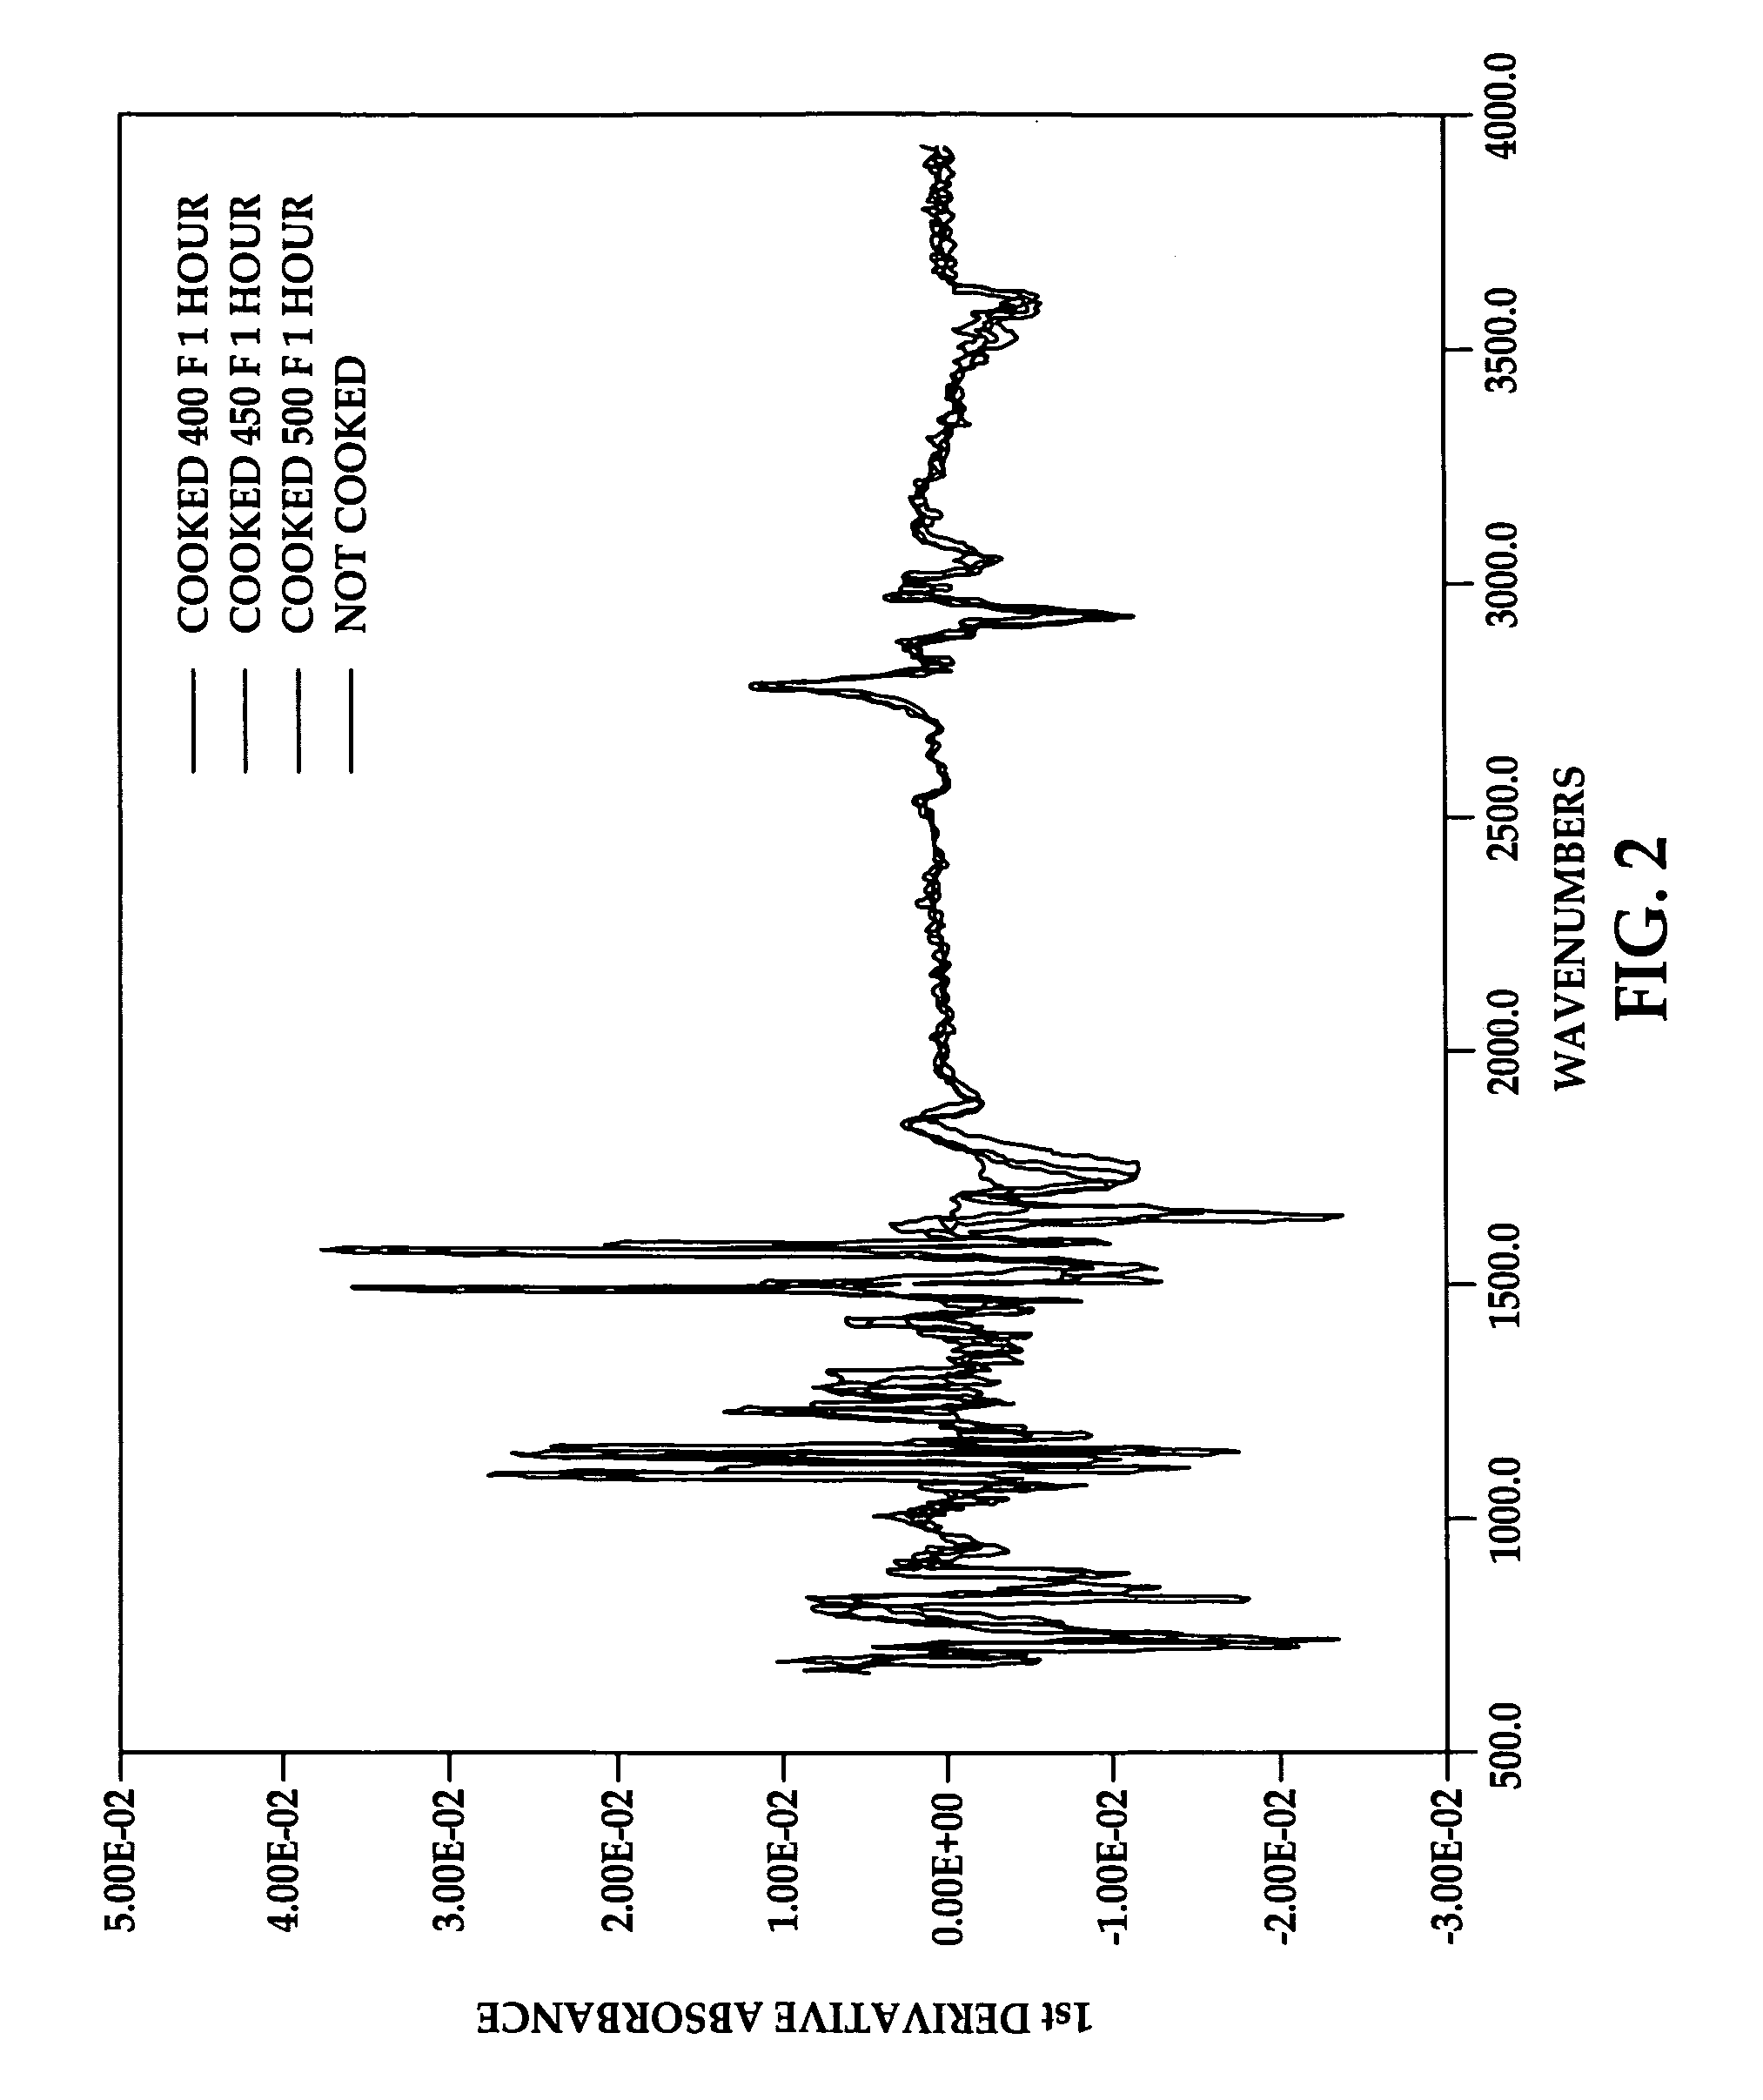 Thermal Effect Measurement with Mid-Infrared Spectroscopy